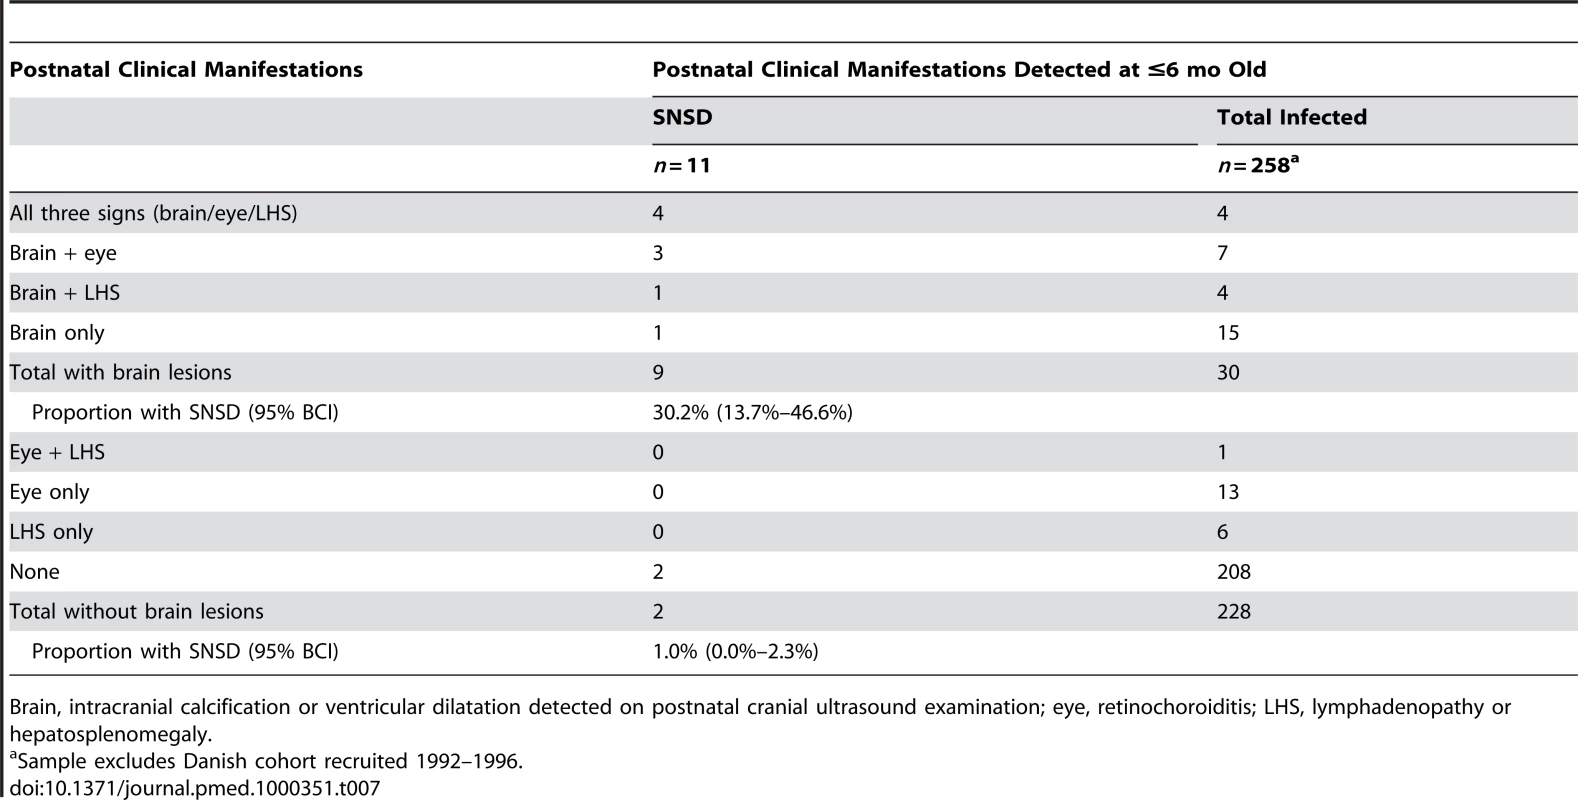 Postnatal clinical manifestations detected in early infancy and probability (%) of SNSD.